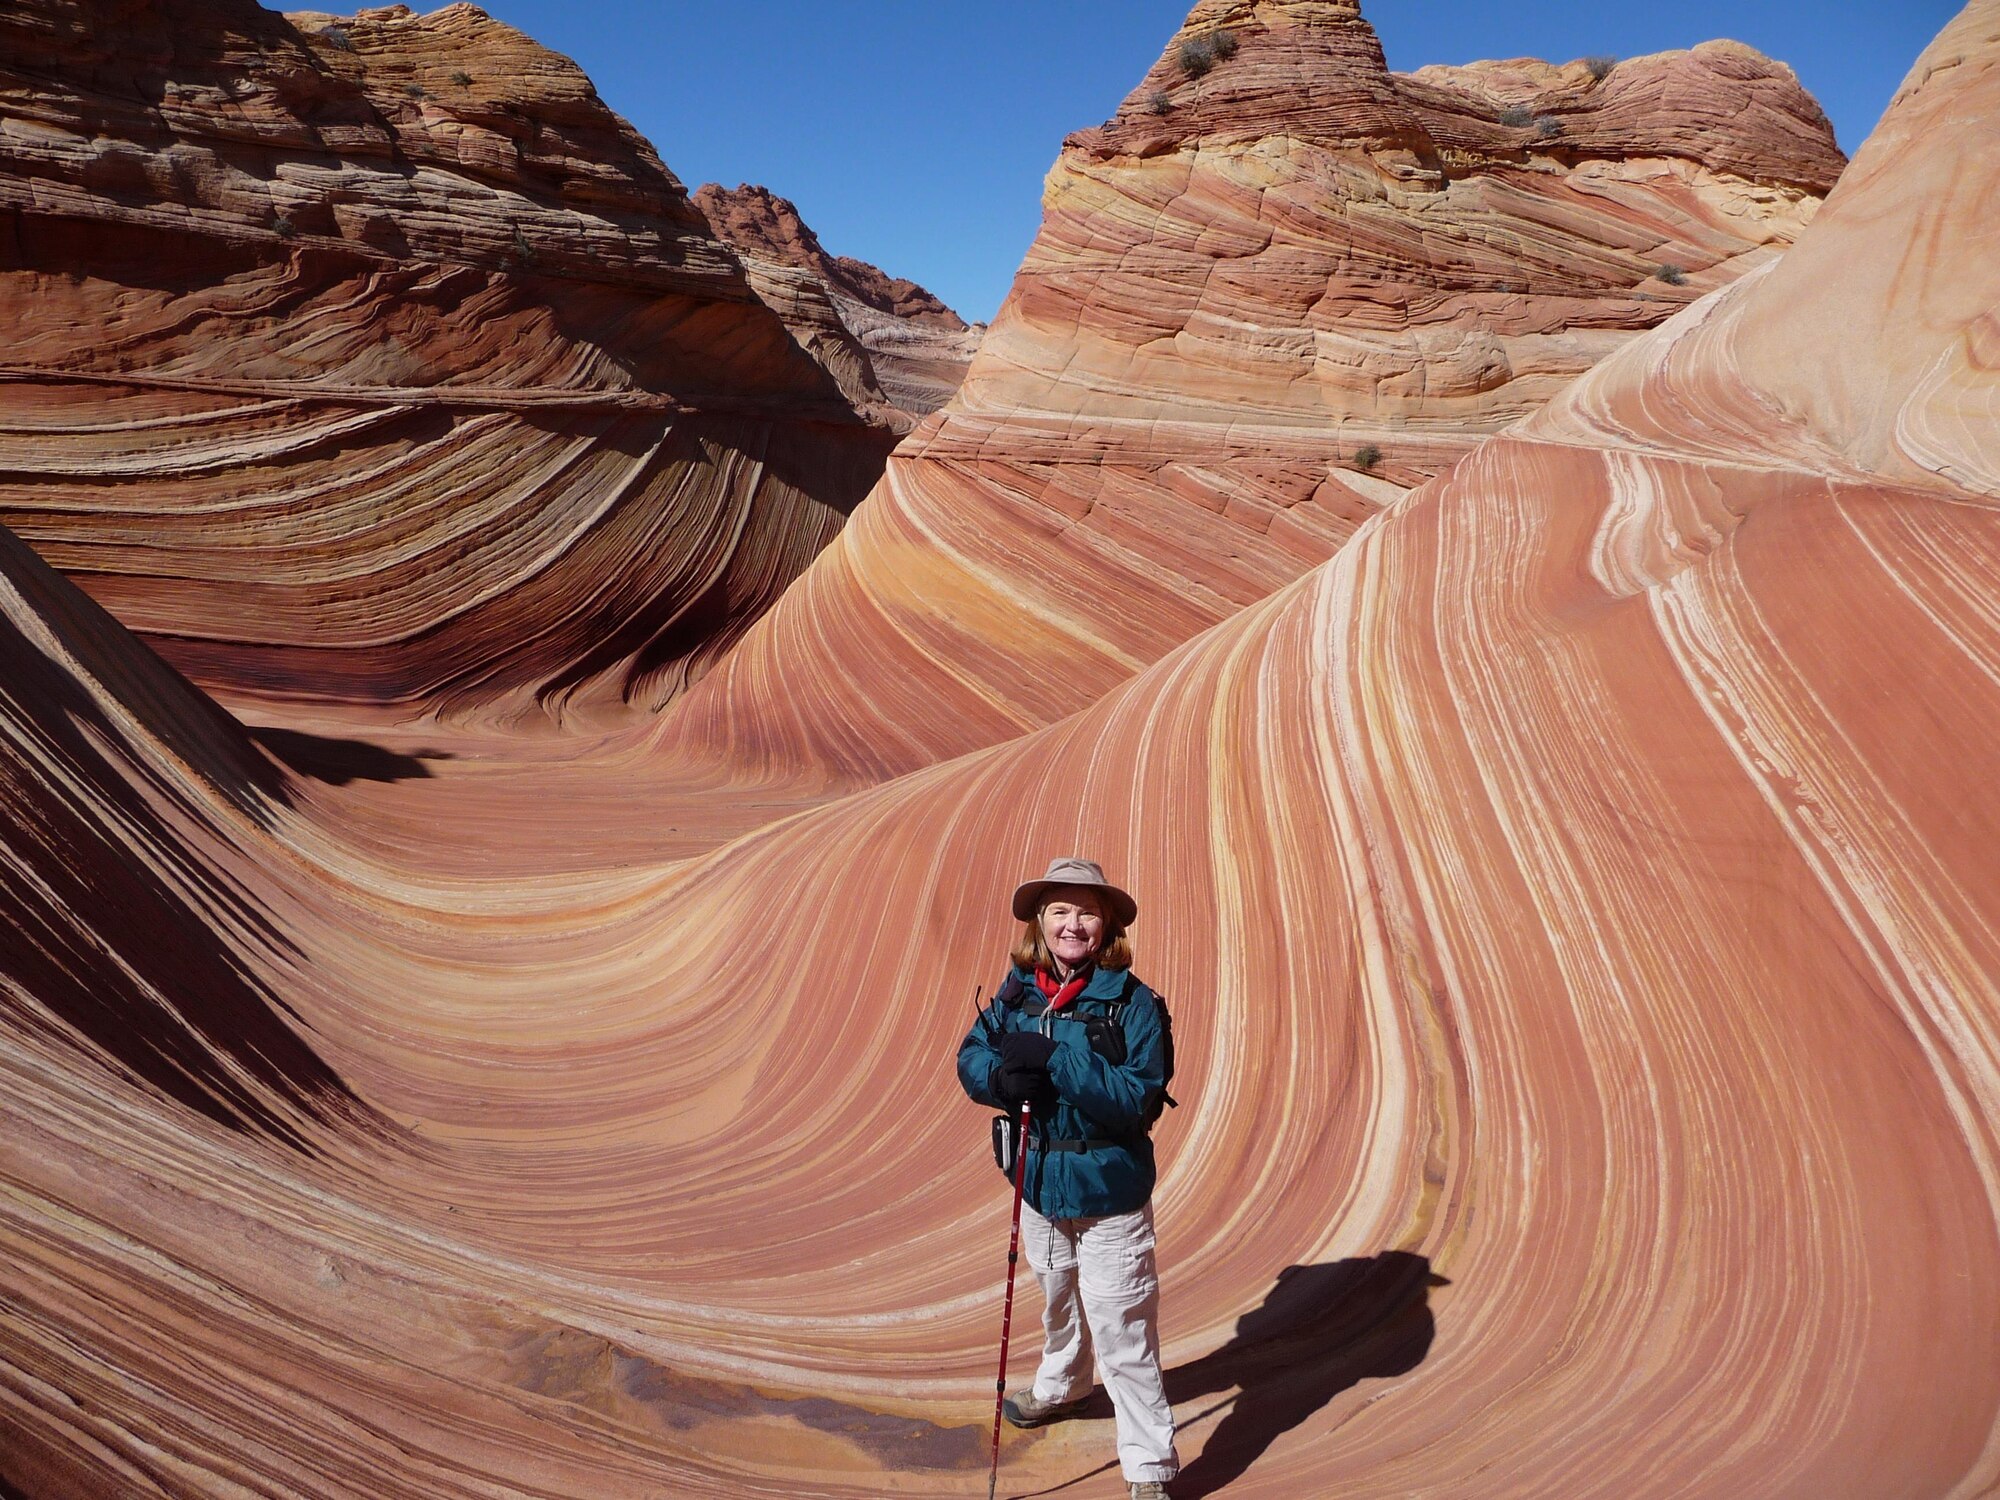 Col. Margie Humphrey, former Air Reserve Personnel Center commander, in a recent photo taken during a trip to the Coyote Buttes area of the Paria Canyon-Vermilion Cliffs Wilderness in Northern Arizona. Humphrey was Headquarters ARPC’s first female commander located at the former Lowry Air Force Base, Colorado. She served as the 24th ARPC commander from Nov. 5, 1997 – June 15, 2000. (U.S. Air Force courtesy photo)